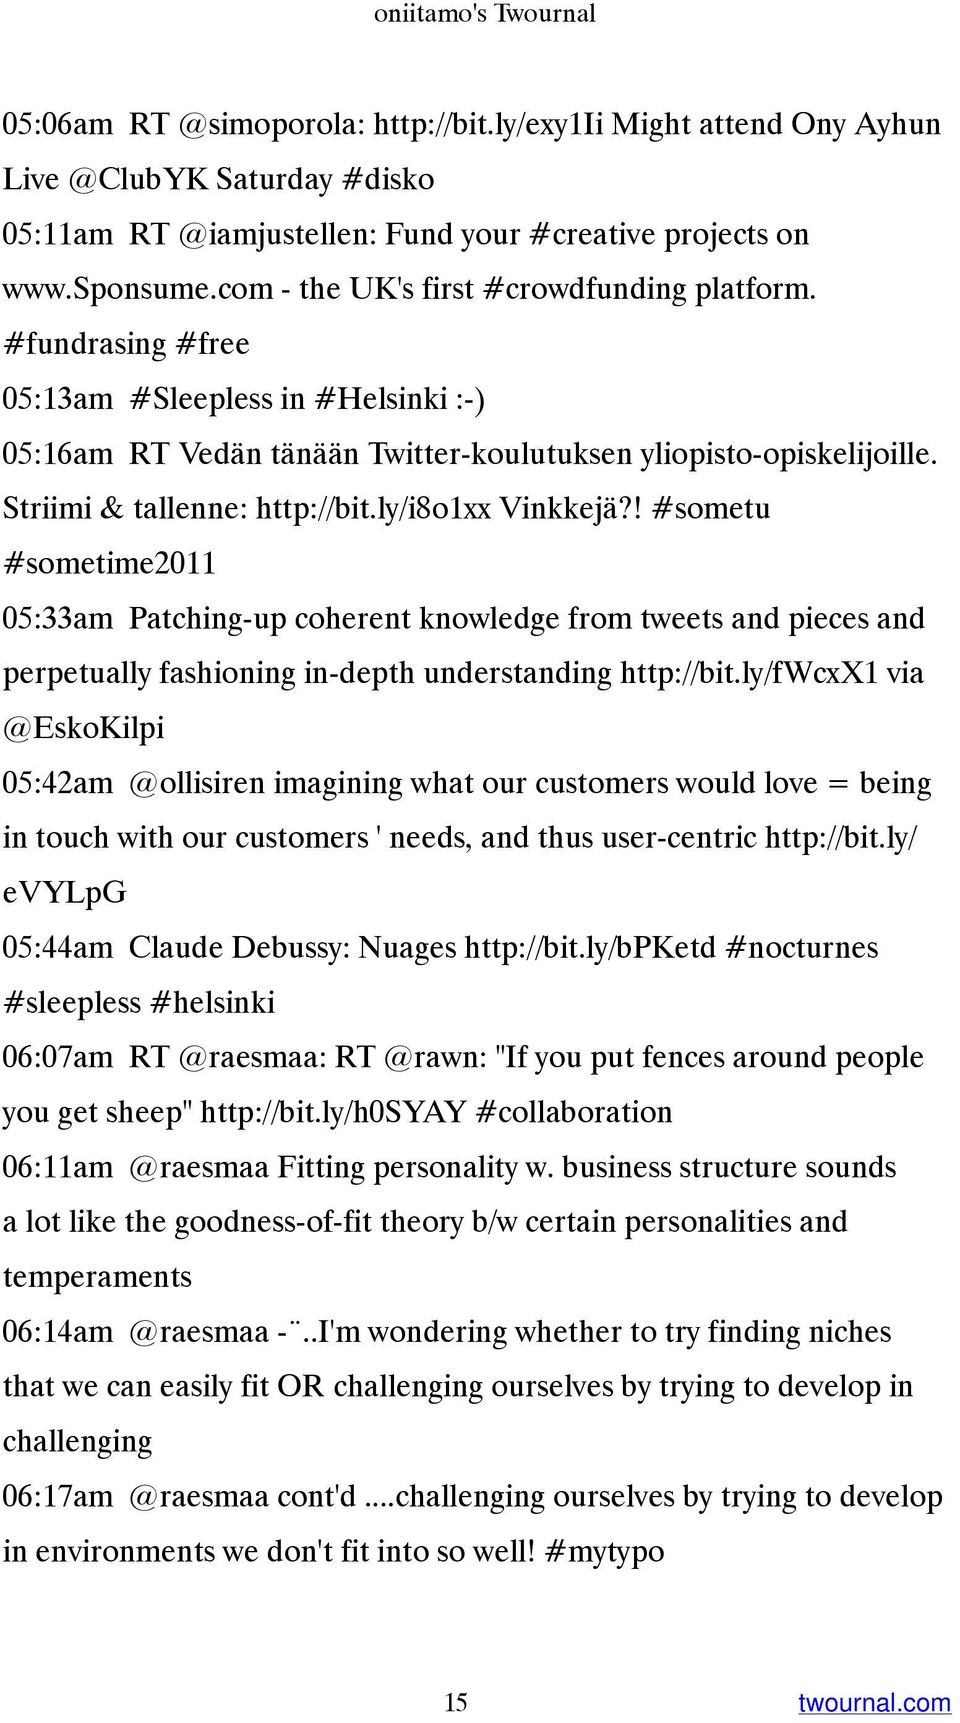 ly/i8o1xx Vinkkejä?! #sometu #sometime2011 05:33am Patching-up coherent knowledge from tweets and pieces and perpetually fashioning in-depth understanding http://bit.